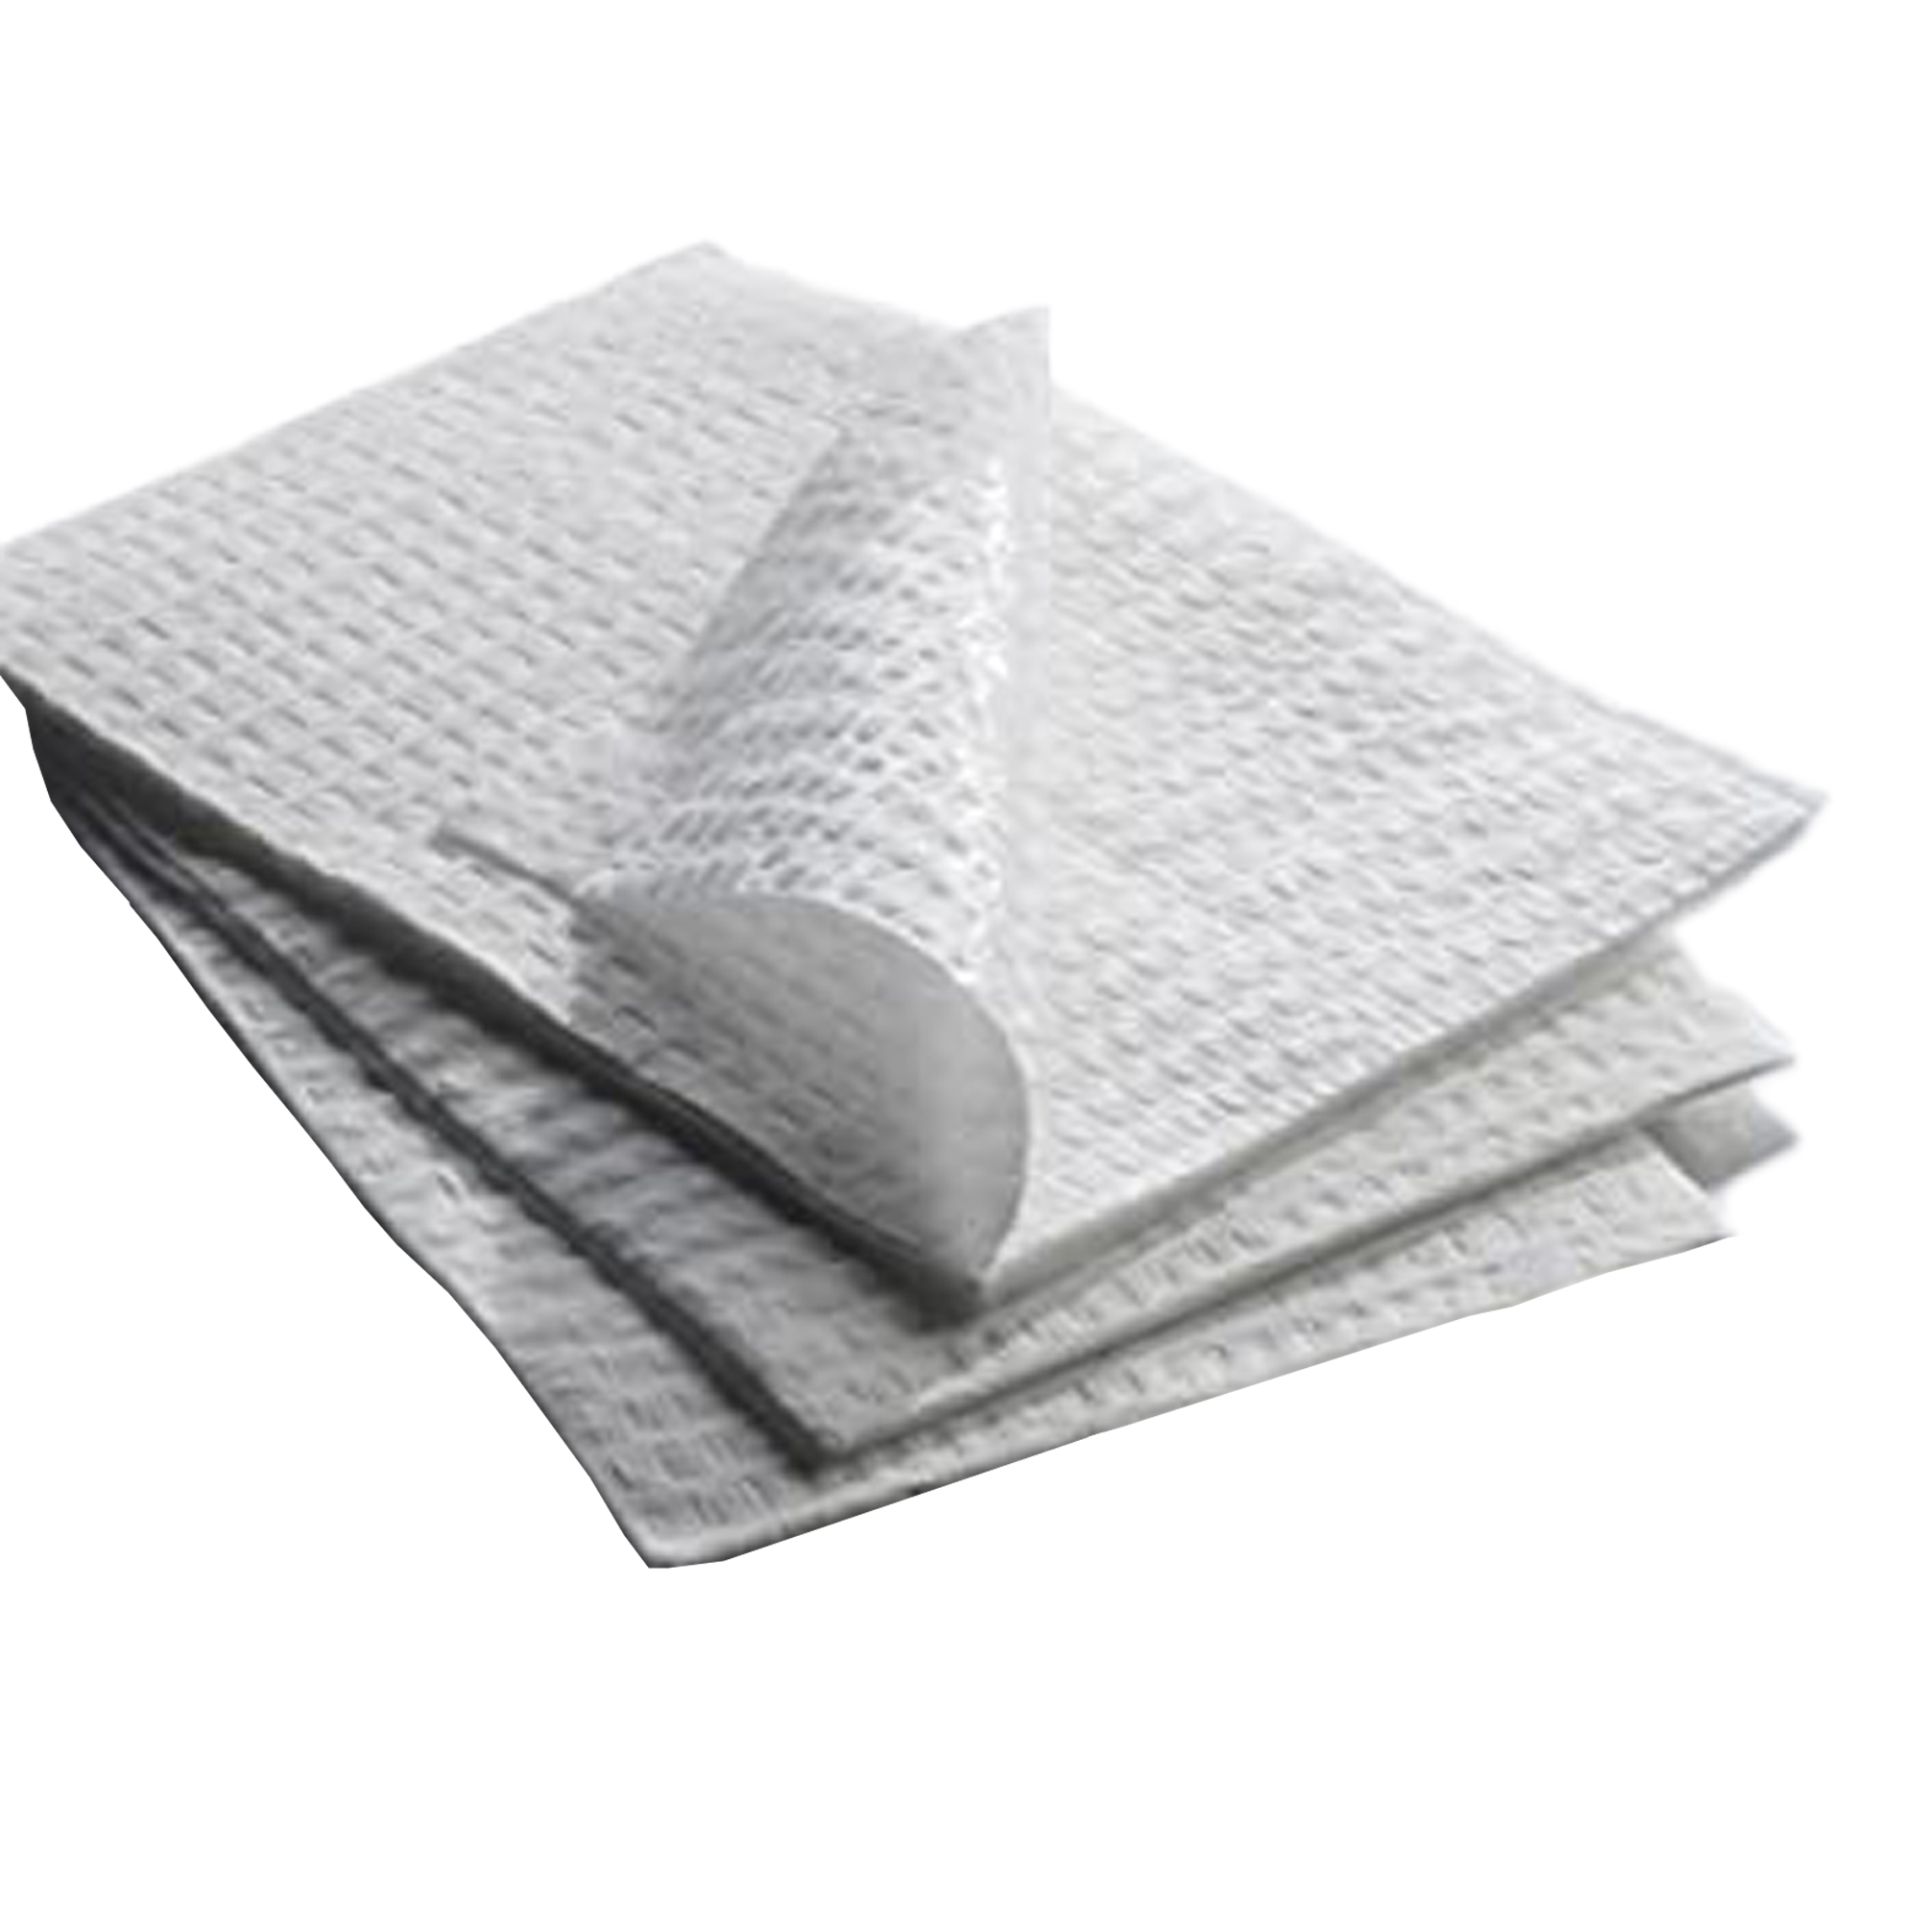 Towel Professional Fully Embossed White 2-Ply 13 .. .  .  